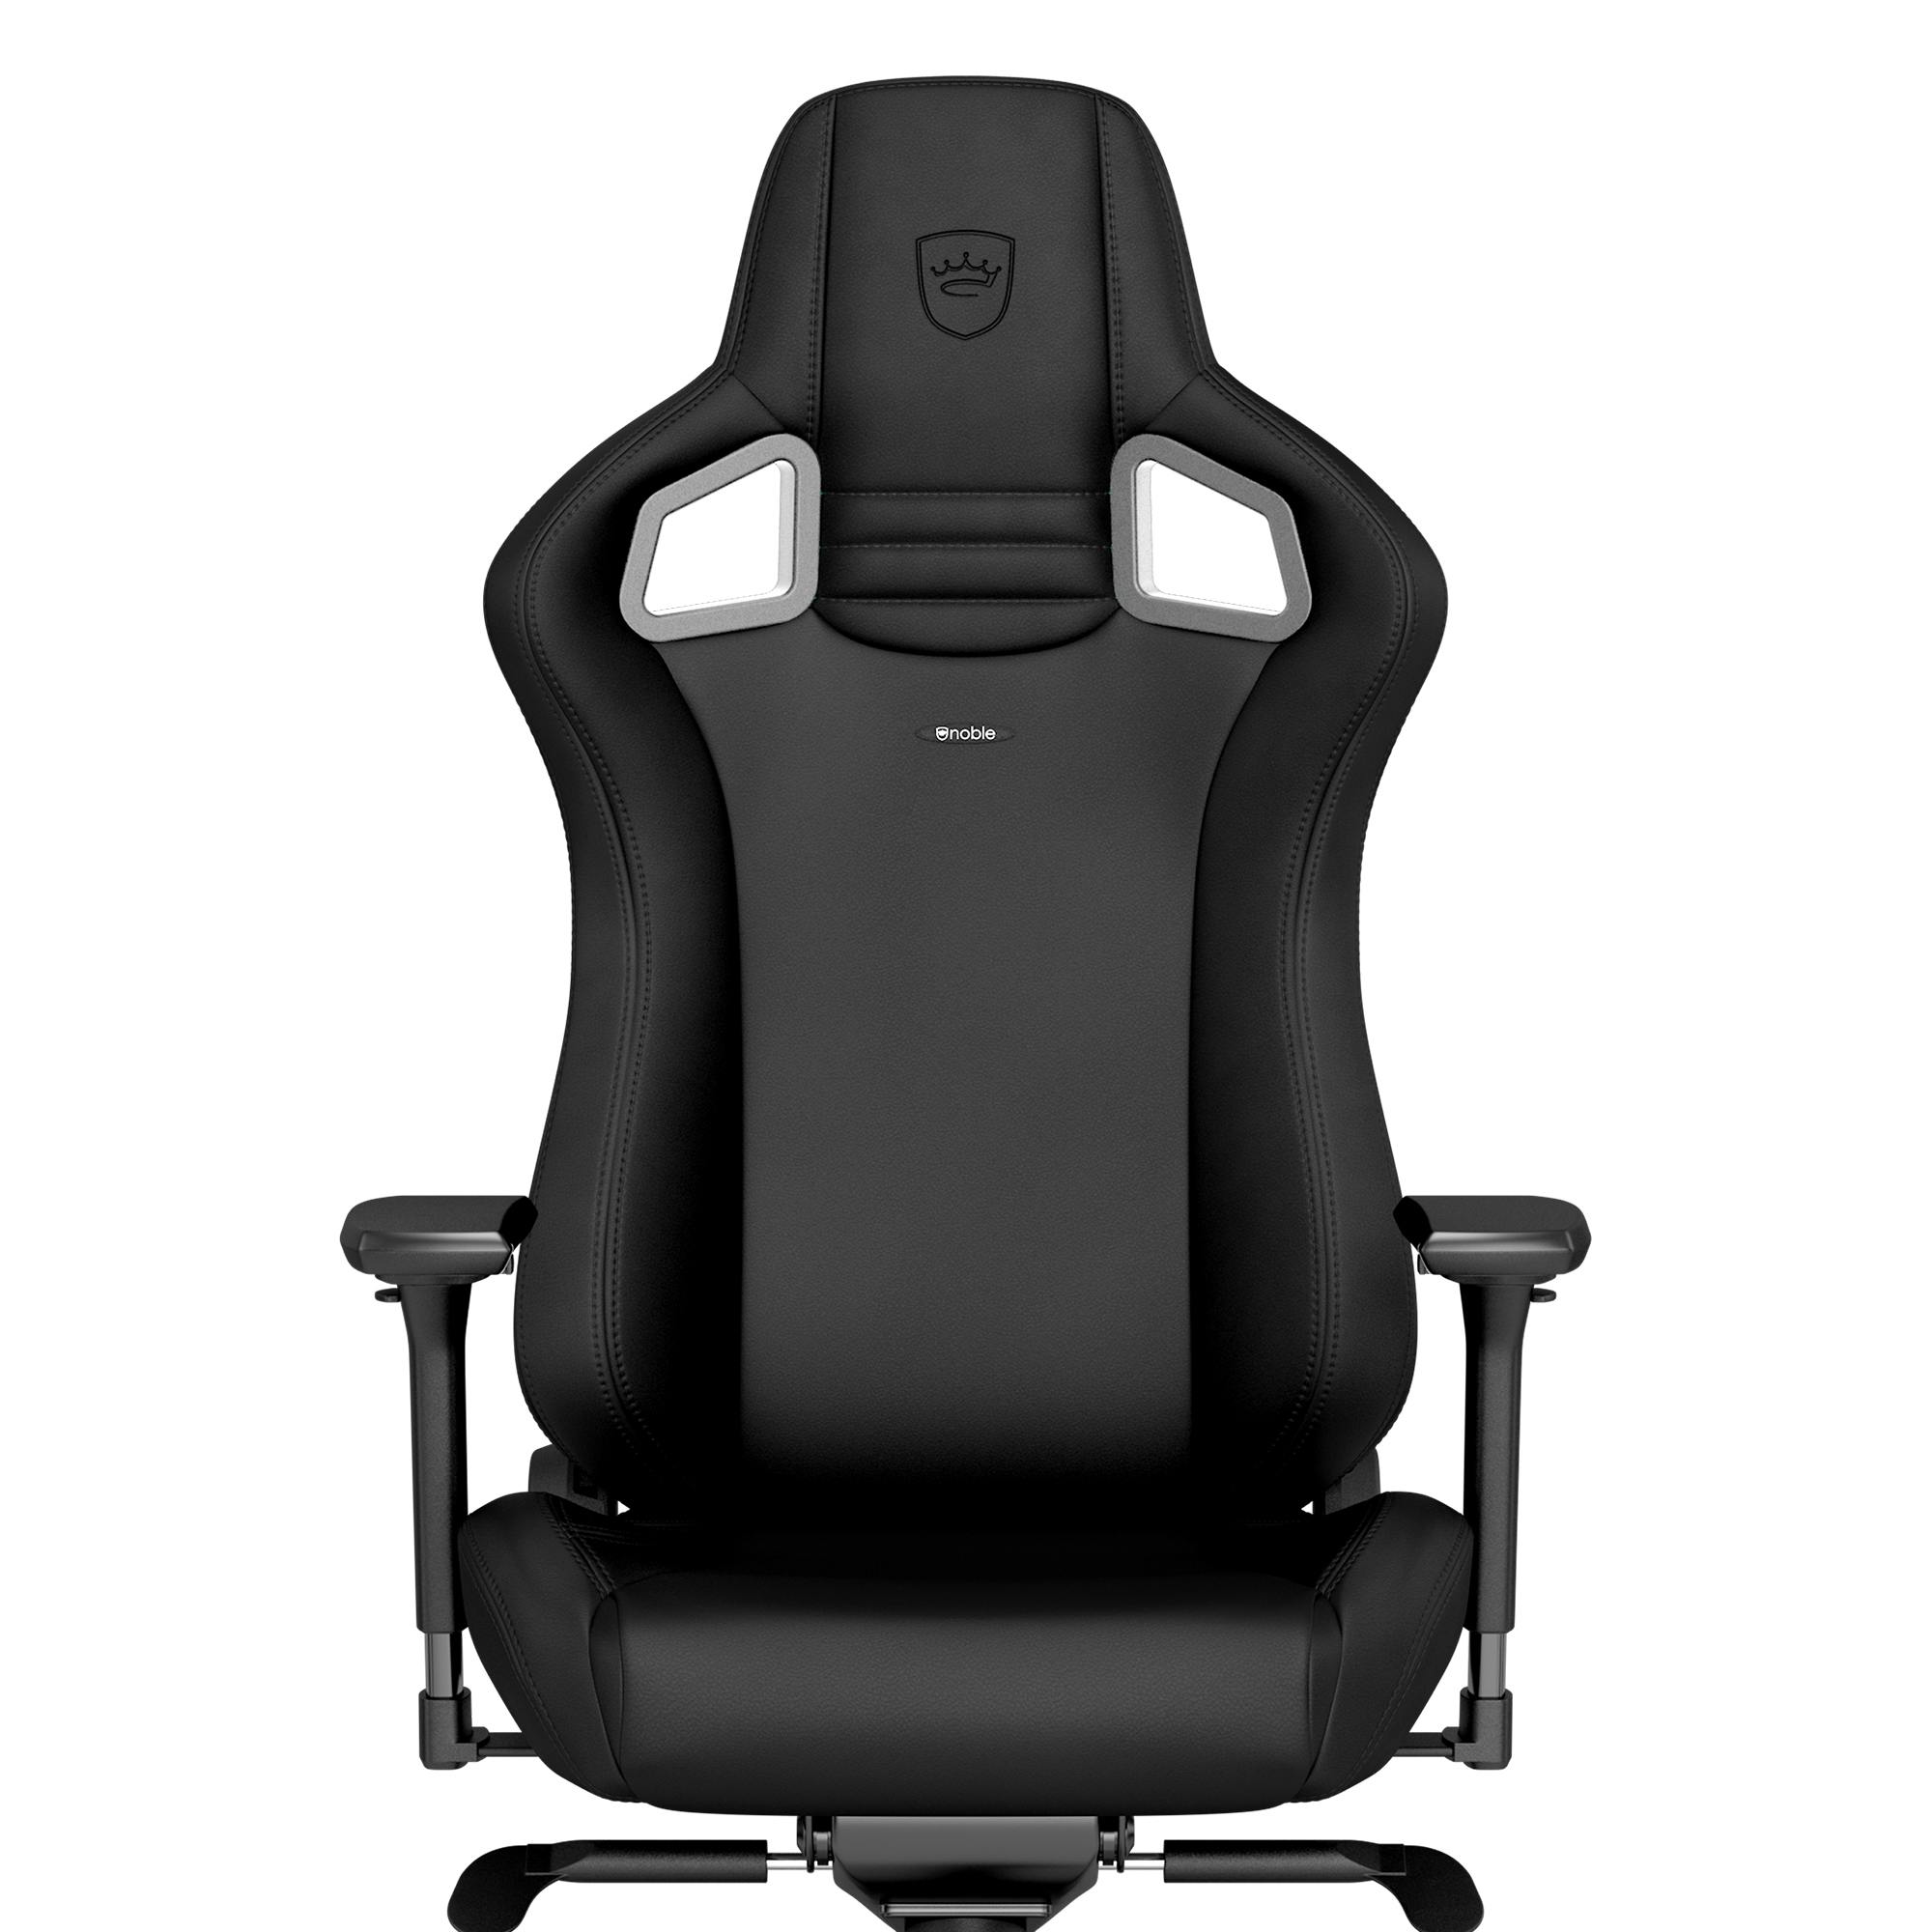 noblechairs - EPIC Black Edition - The best just got even better 